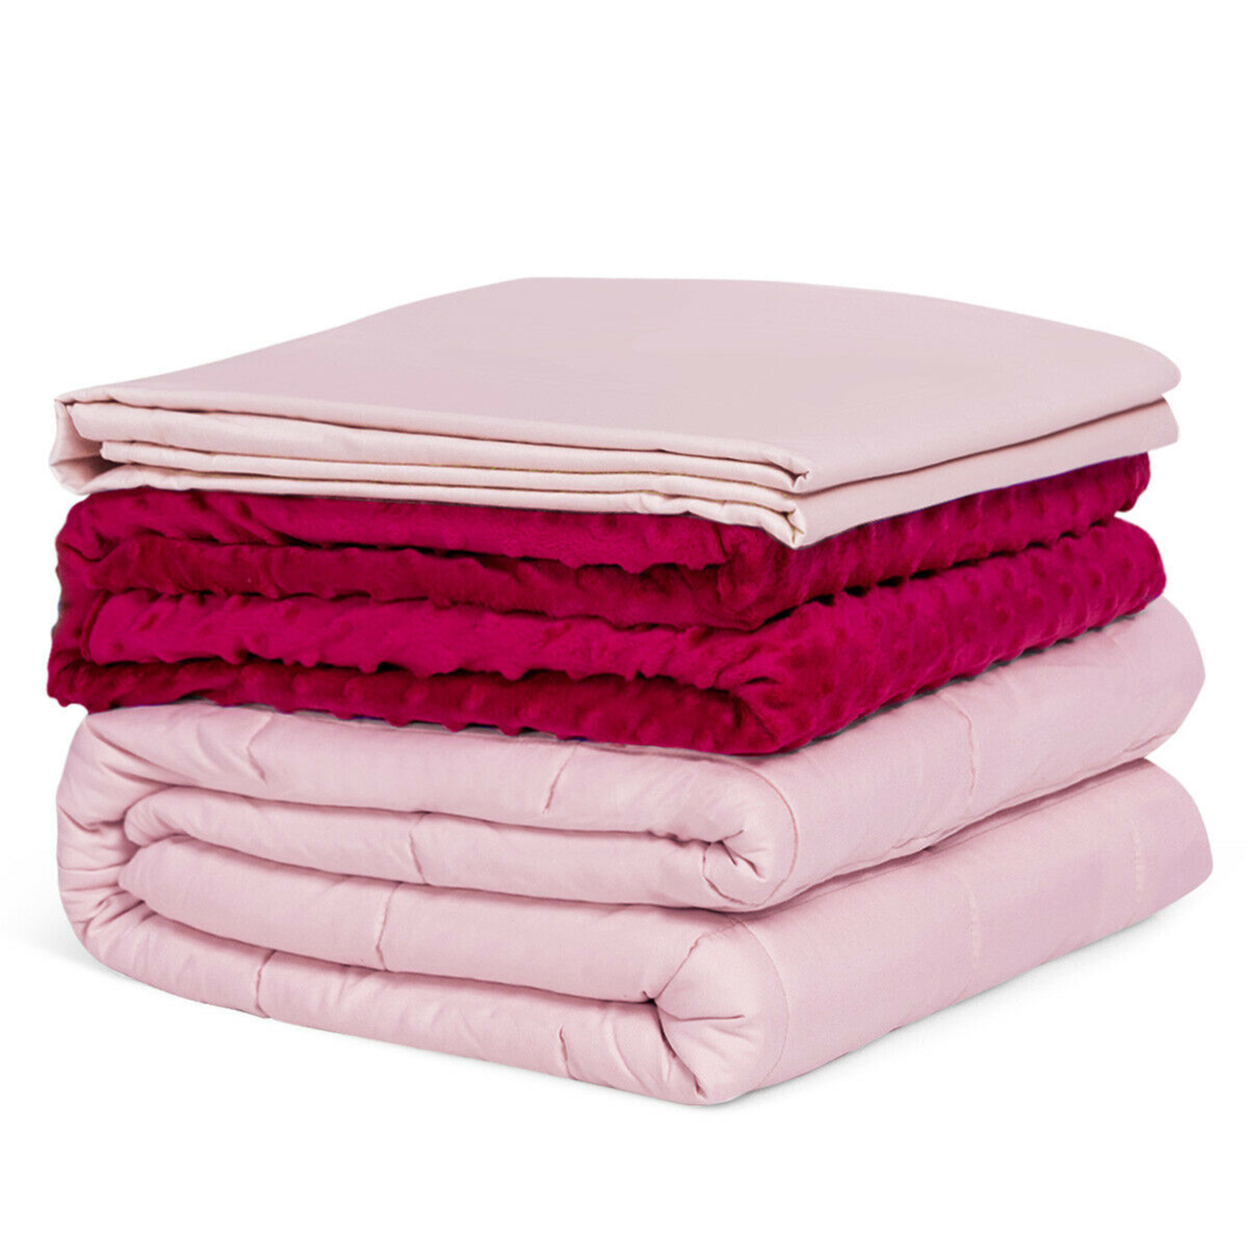 15lbs Heavy Weighted Blanket 3 Piece Set W/ Hot & Cold Duvet Covers 60''x80'' Pink